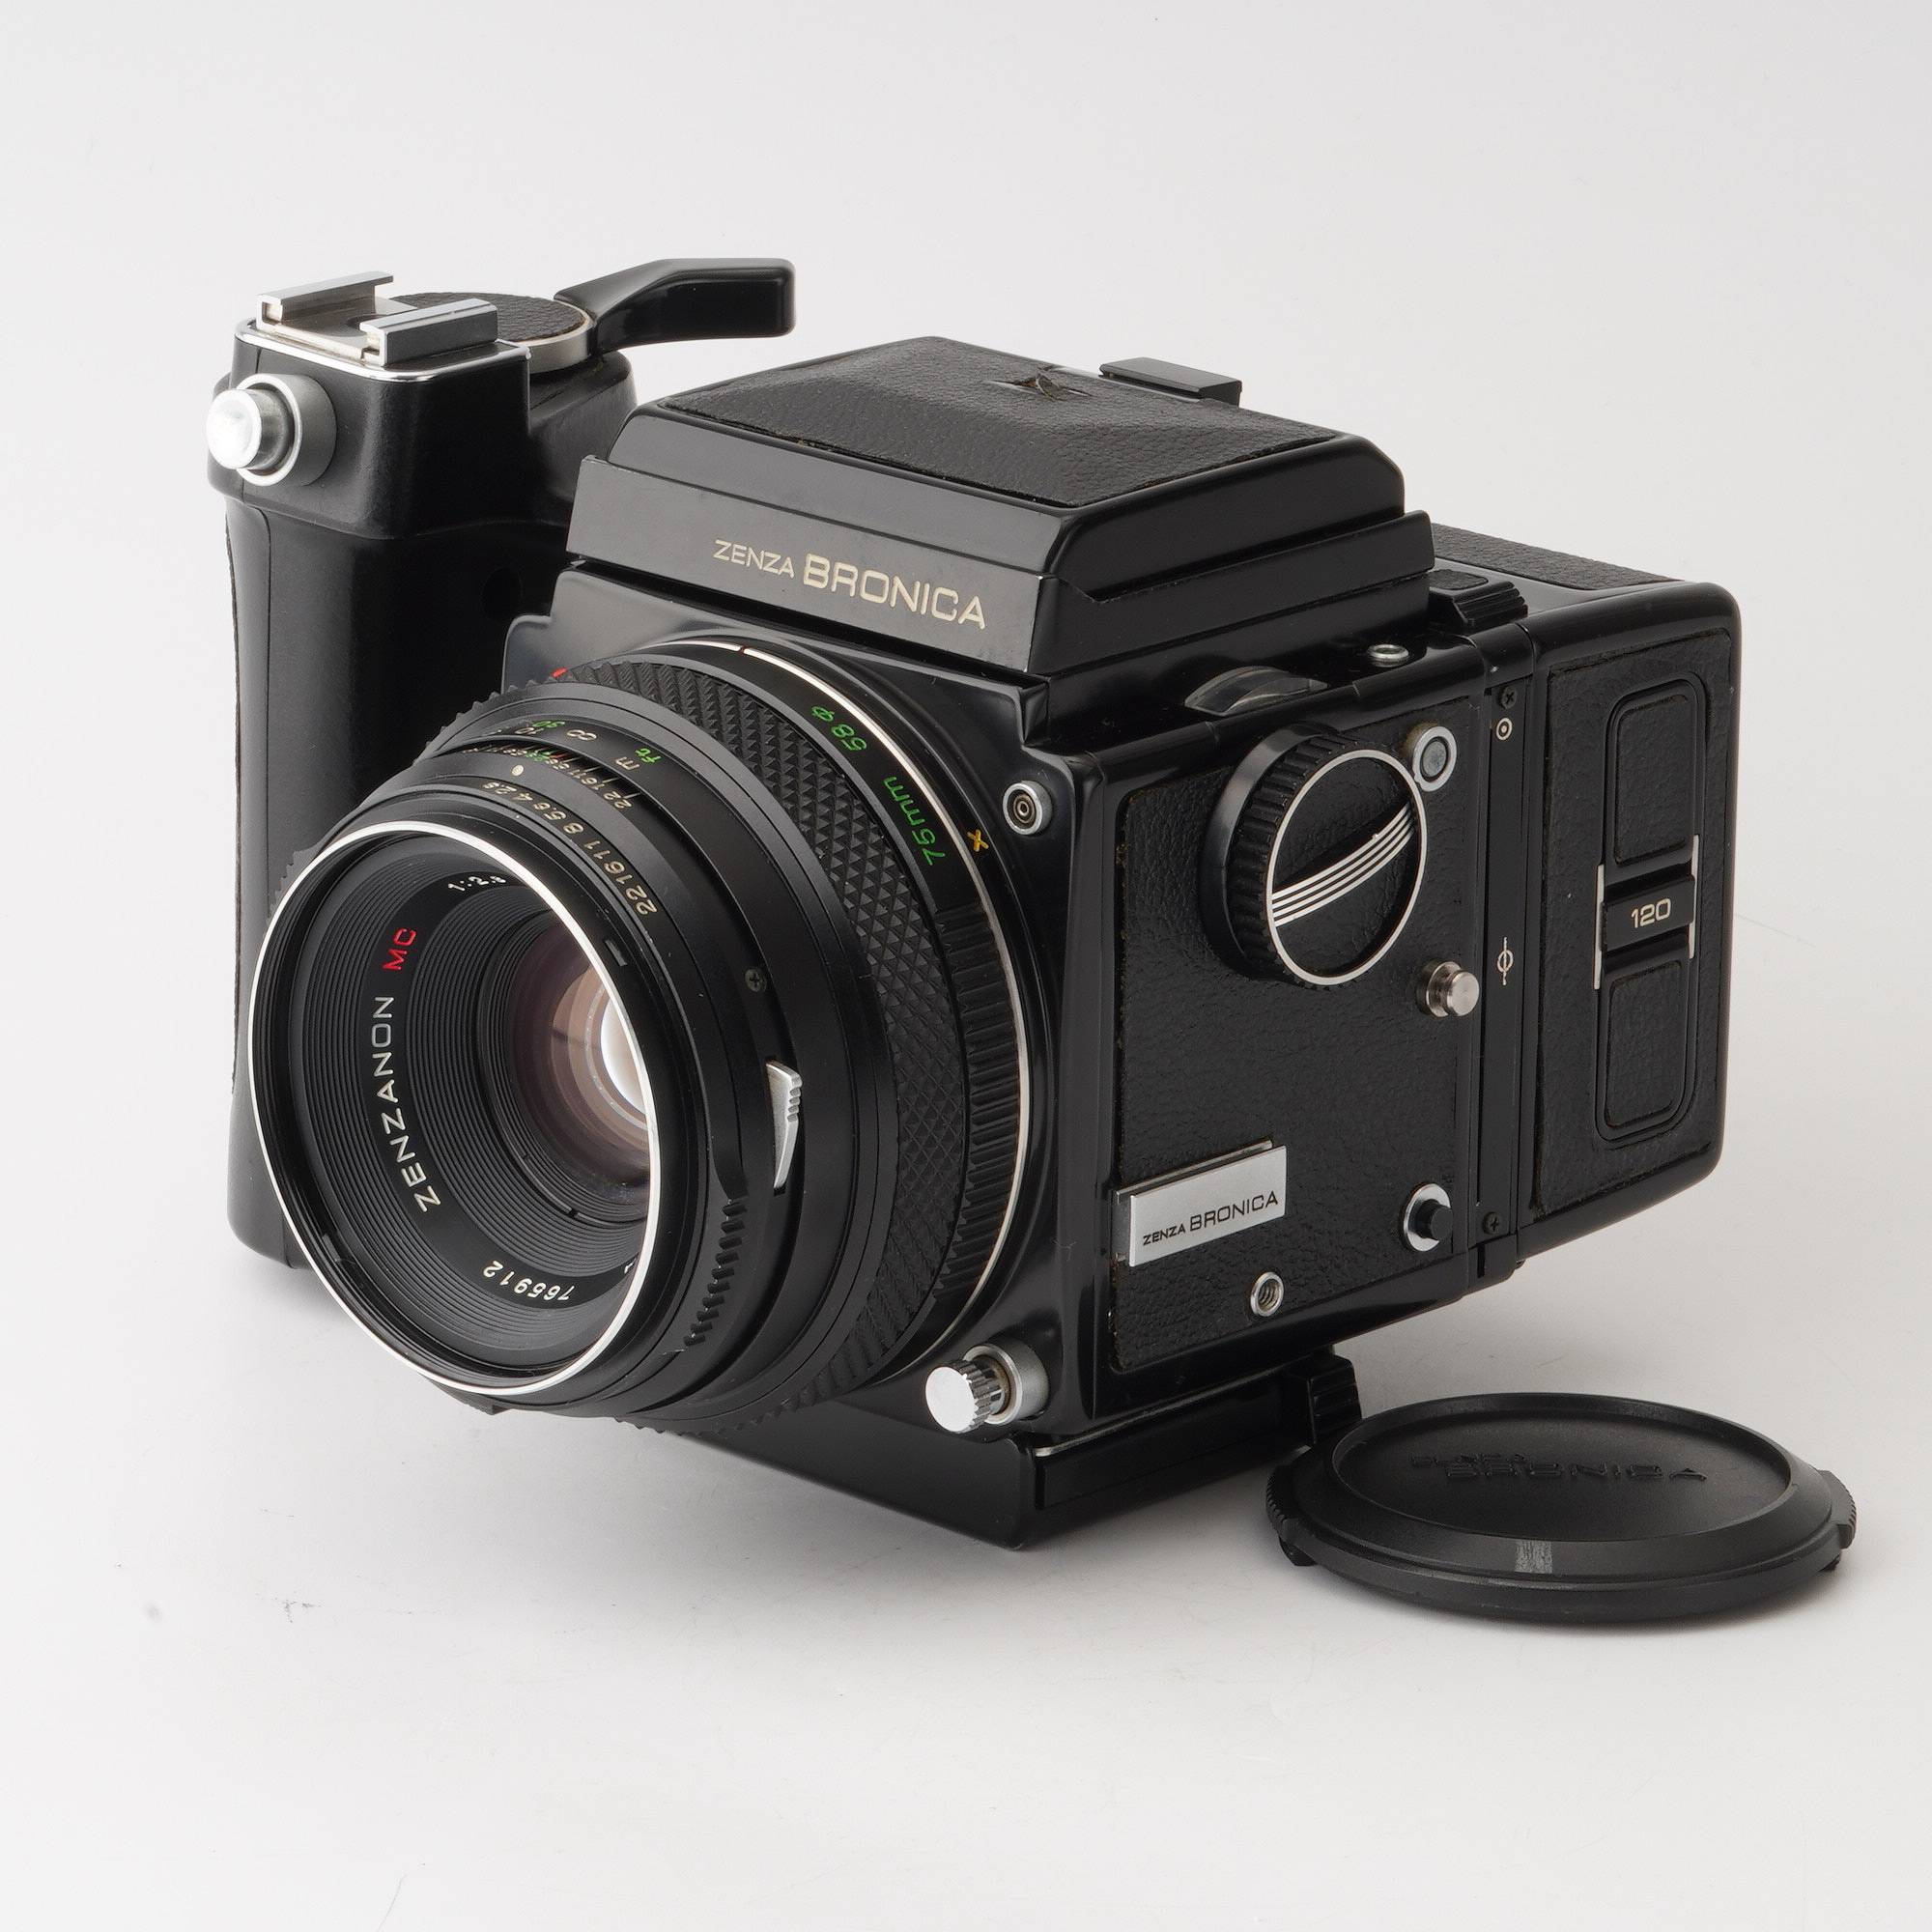 ZENZA BRONICA ブロニカ ETR-Si PE 75mm F2.8-